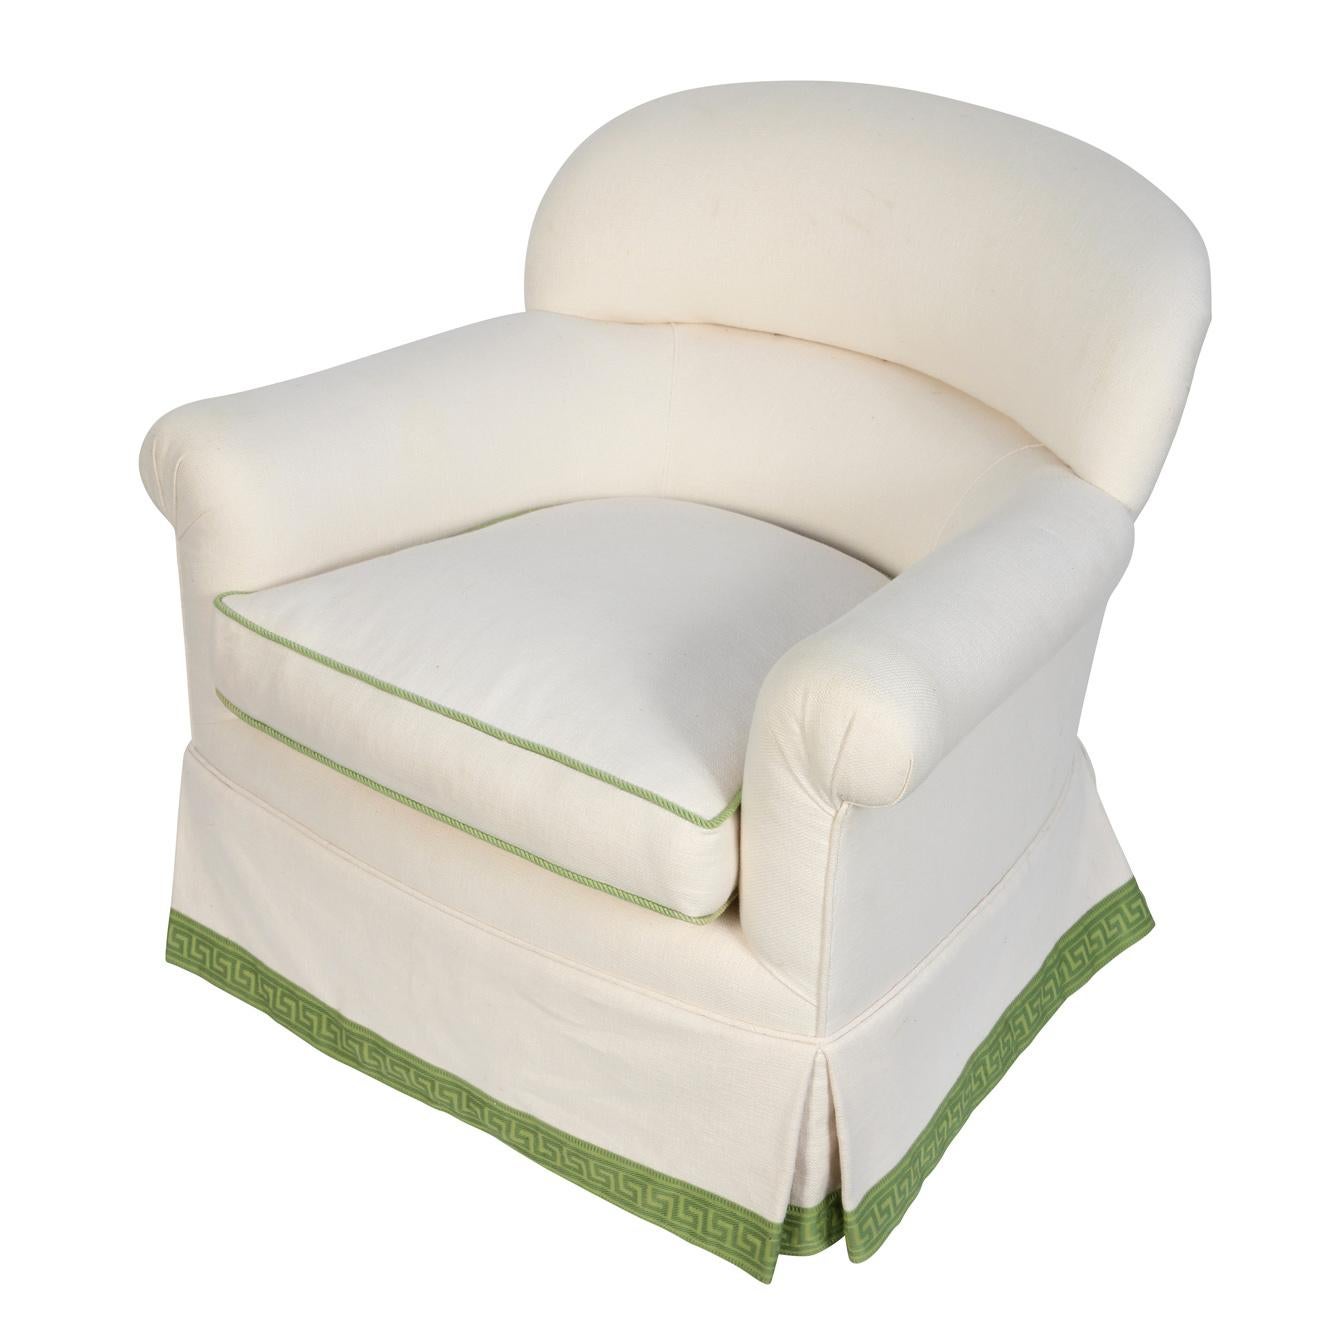 Syrie Maugham upholstered arm chair with curved back, newly upholstered in white linen with green detail.